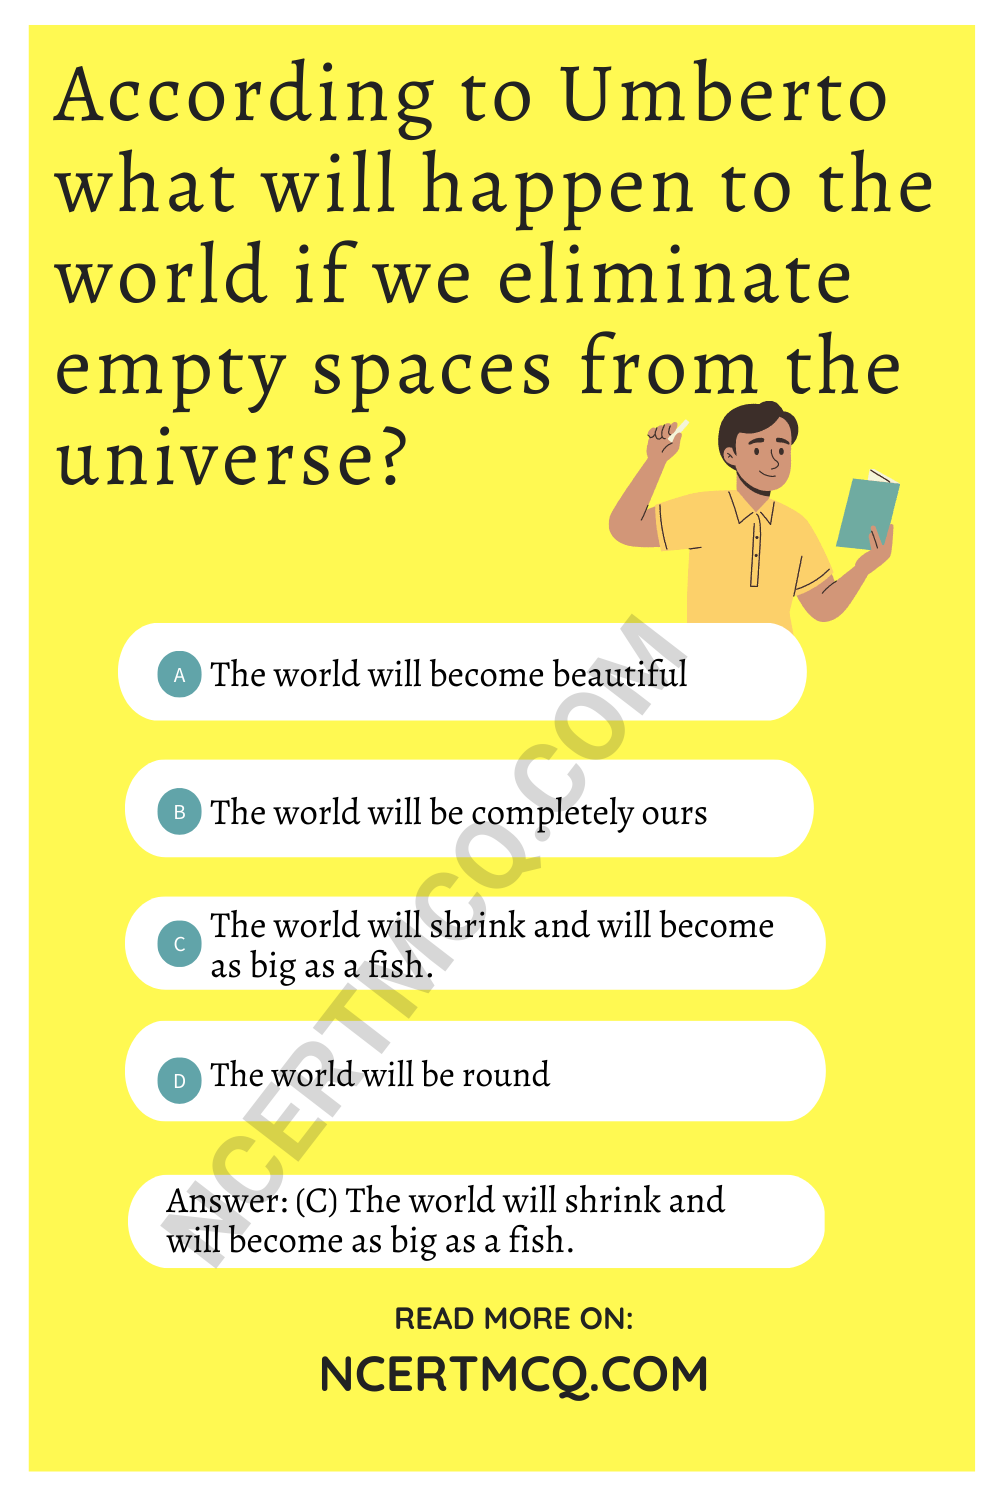 According to Umberto what will happen to the world if we eliminate empty spaces from the universe?